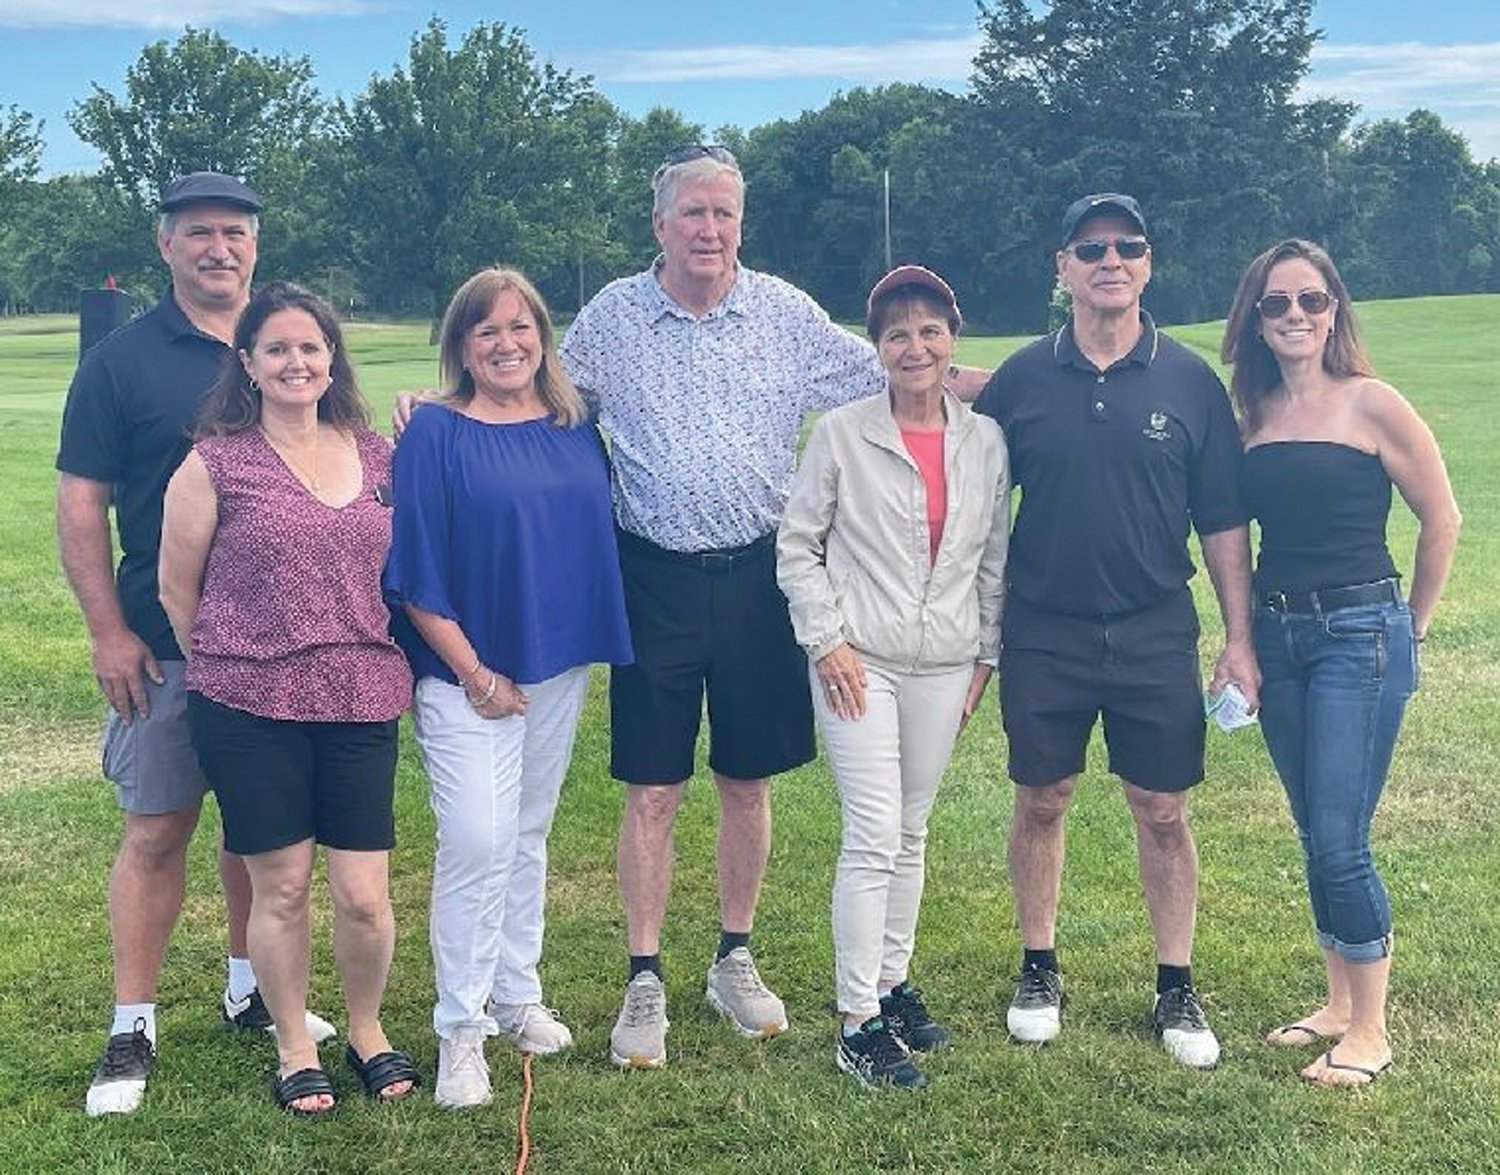 TOURNEY TROUPE: Mayor Ken Hopkins is joined by Hope Center Development Director Gina Harwood, President/CEO Ellen Grizzetti, Board Chair Janice DeFrances and Board Members Richard Cardillo and Jennifer Rowlett.